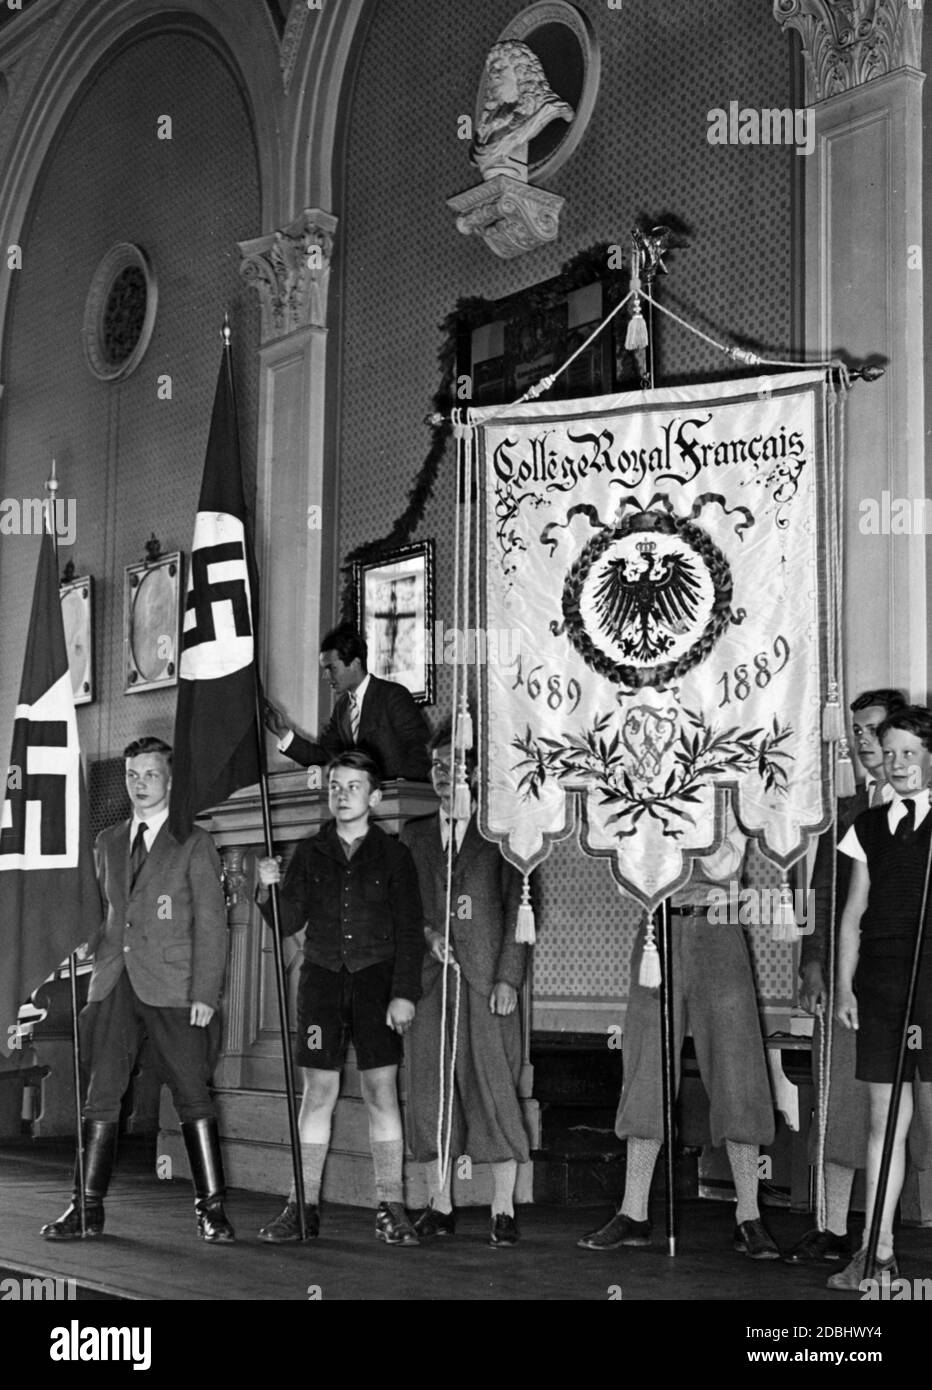 At the beginning of the school year pupils are holding school flags in the Franzoesischen Gymnasium on Reichstagsufer. Beside the swastika flags there is the flag for the 200th anniversary of the College Royal Francais 1689-1889. Above is a bust of the Great Elector Friedrich Wilhelm von Brandenburg. Stock Photo